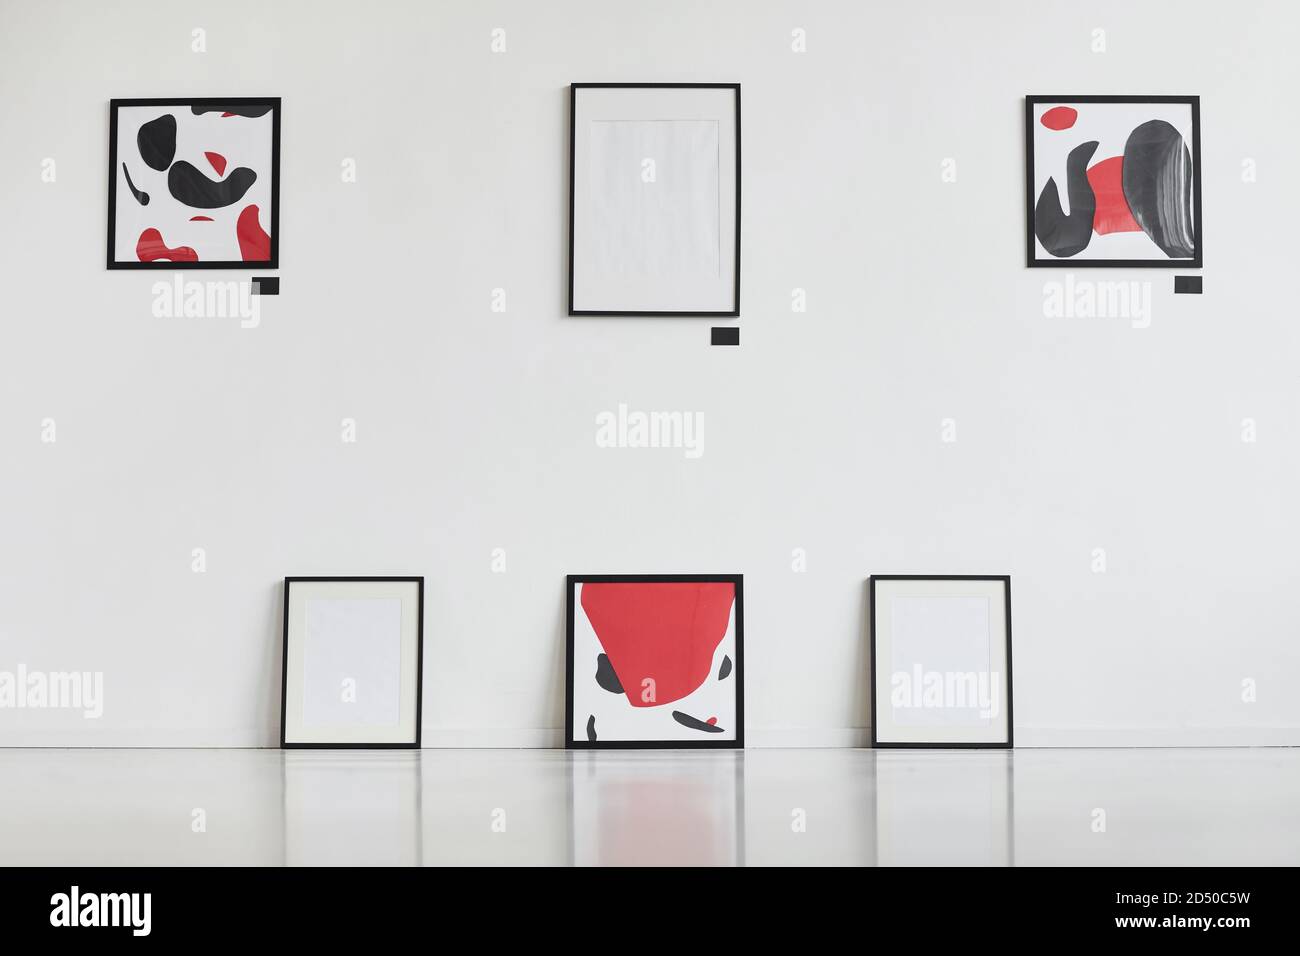 Graphic background image of modern abstract paintings with black and red hanging on white wall in art gallery exhibition, copy space Stock Photo